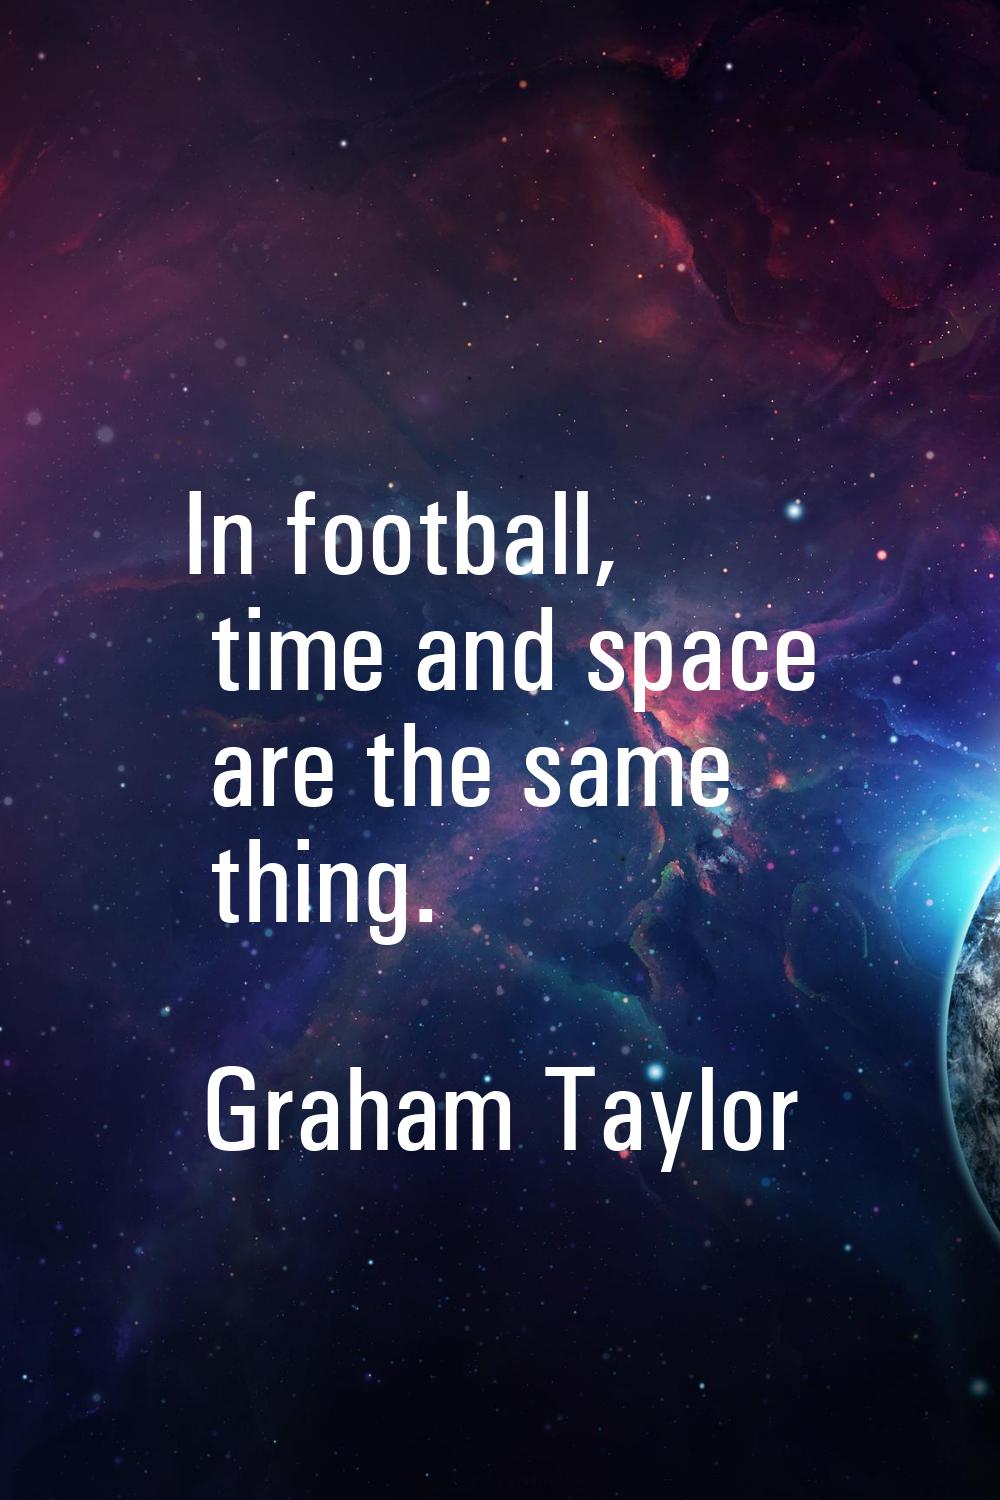 In football, time and space are the same thing.